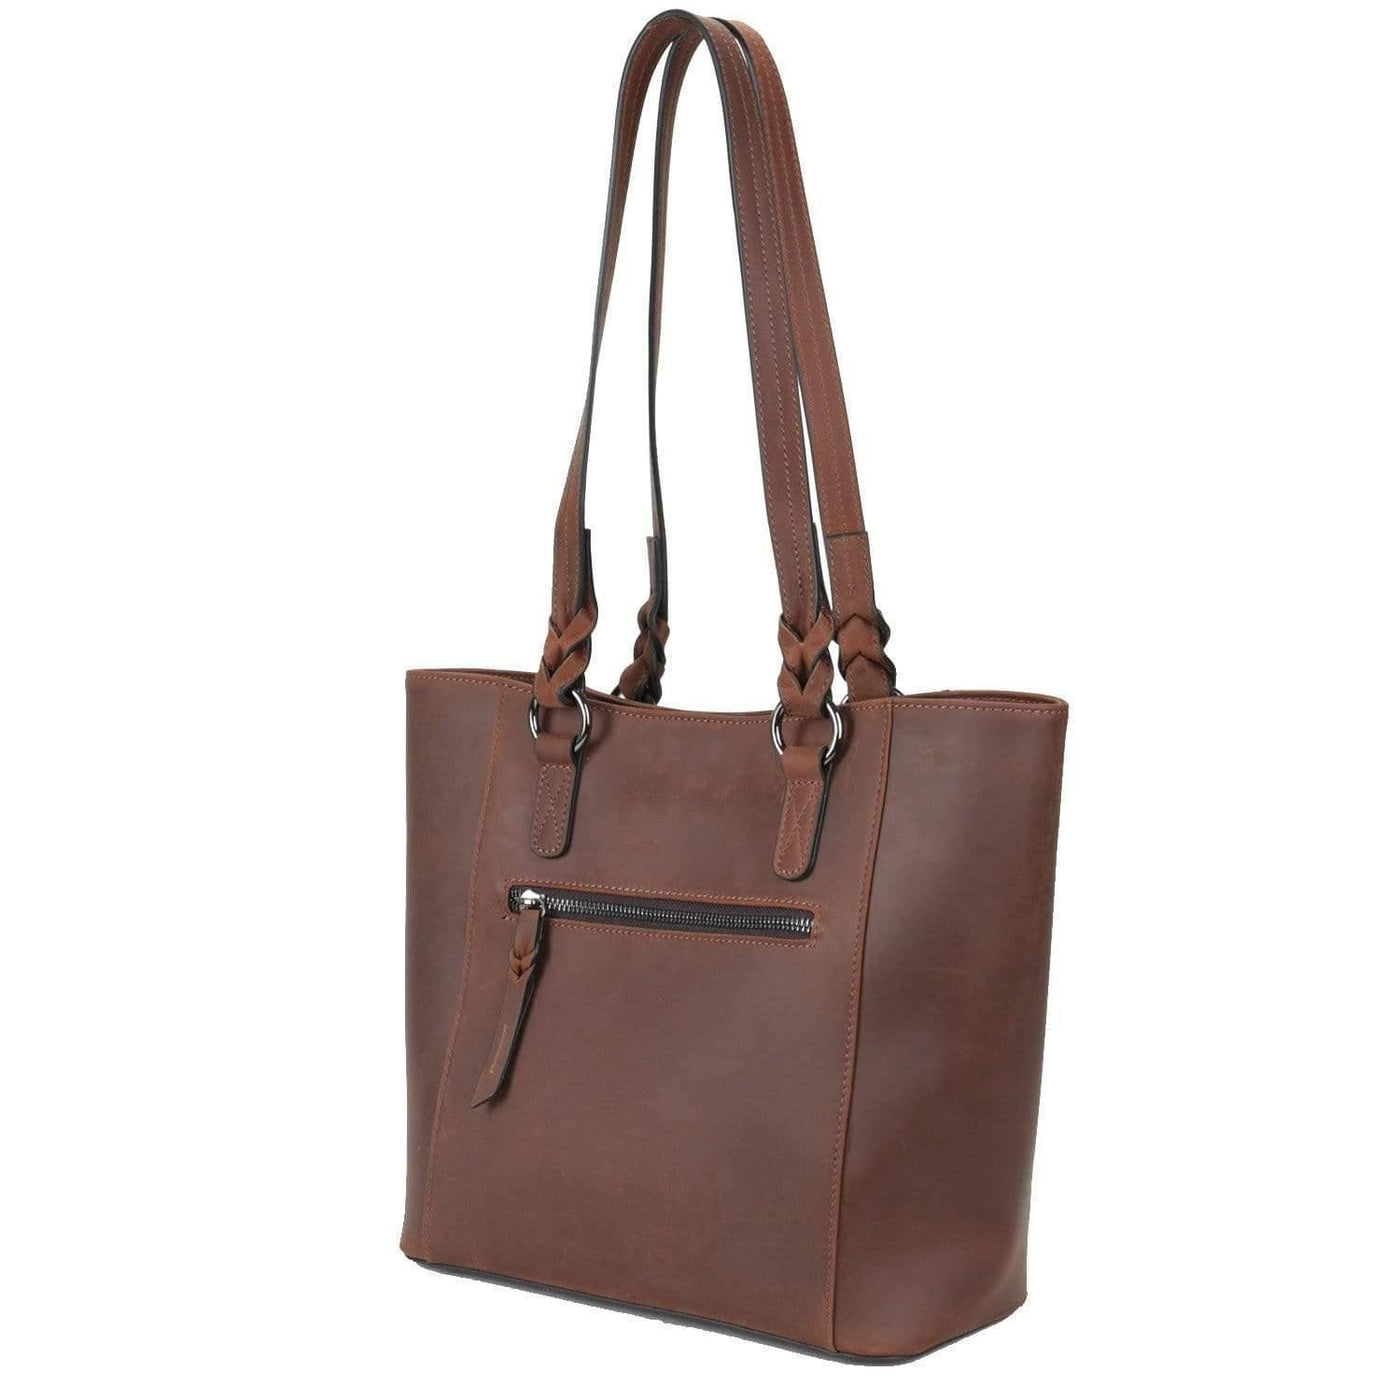 Lady Conceal Concealed Carry Purse Concealed Carry Maddie Leather Tote by Lady Conceal